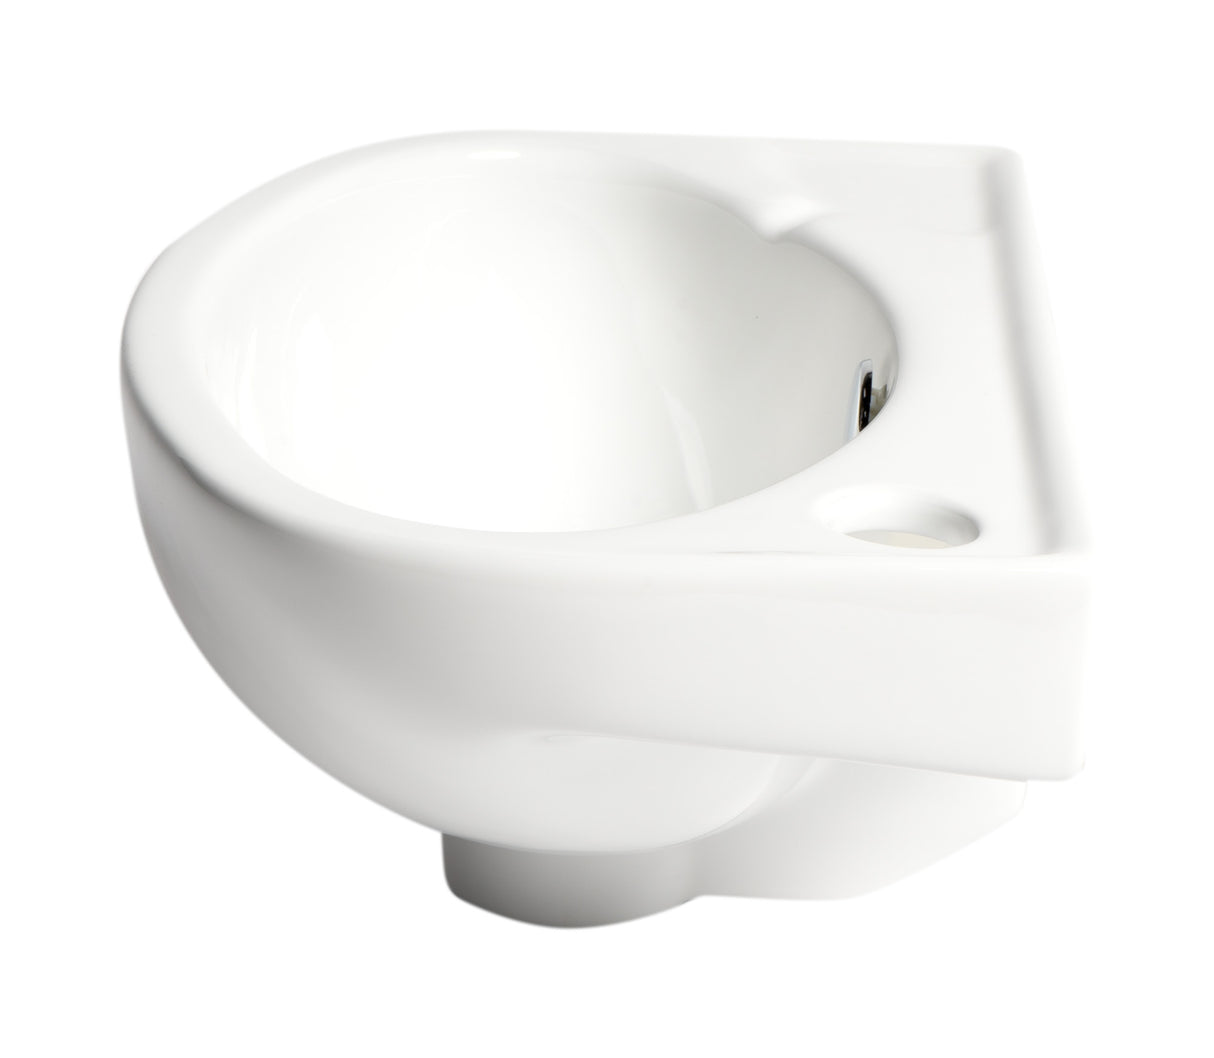 ALFI brand ABC118 White 14" Small Wall Mounted Ceramic Sink with Faucet Hole